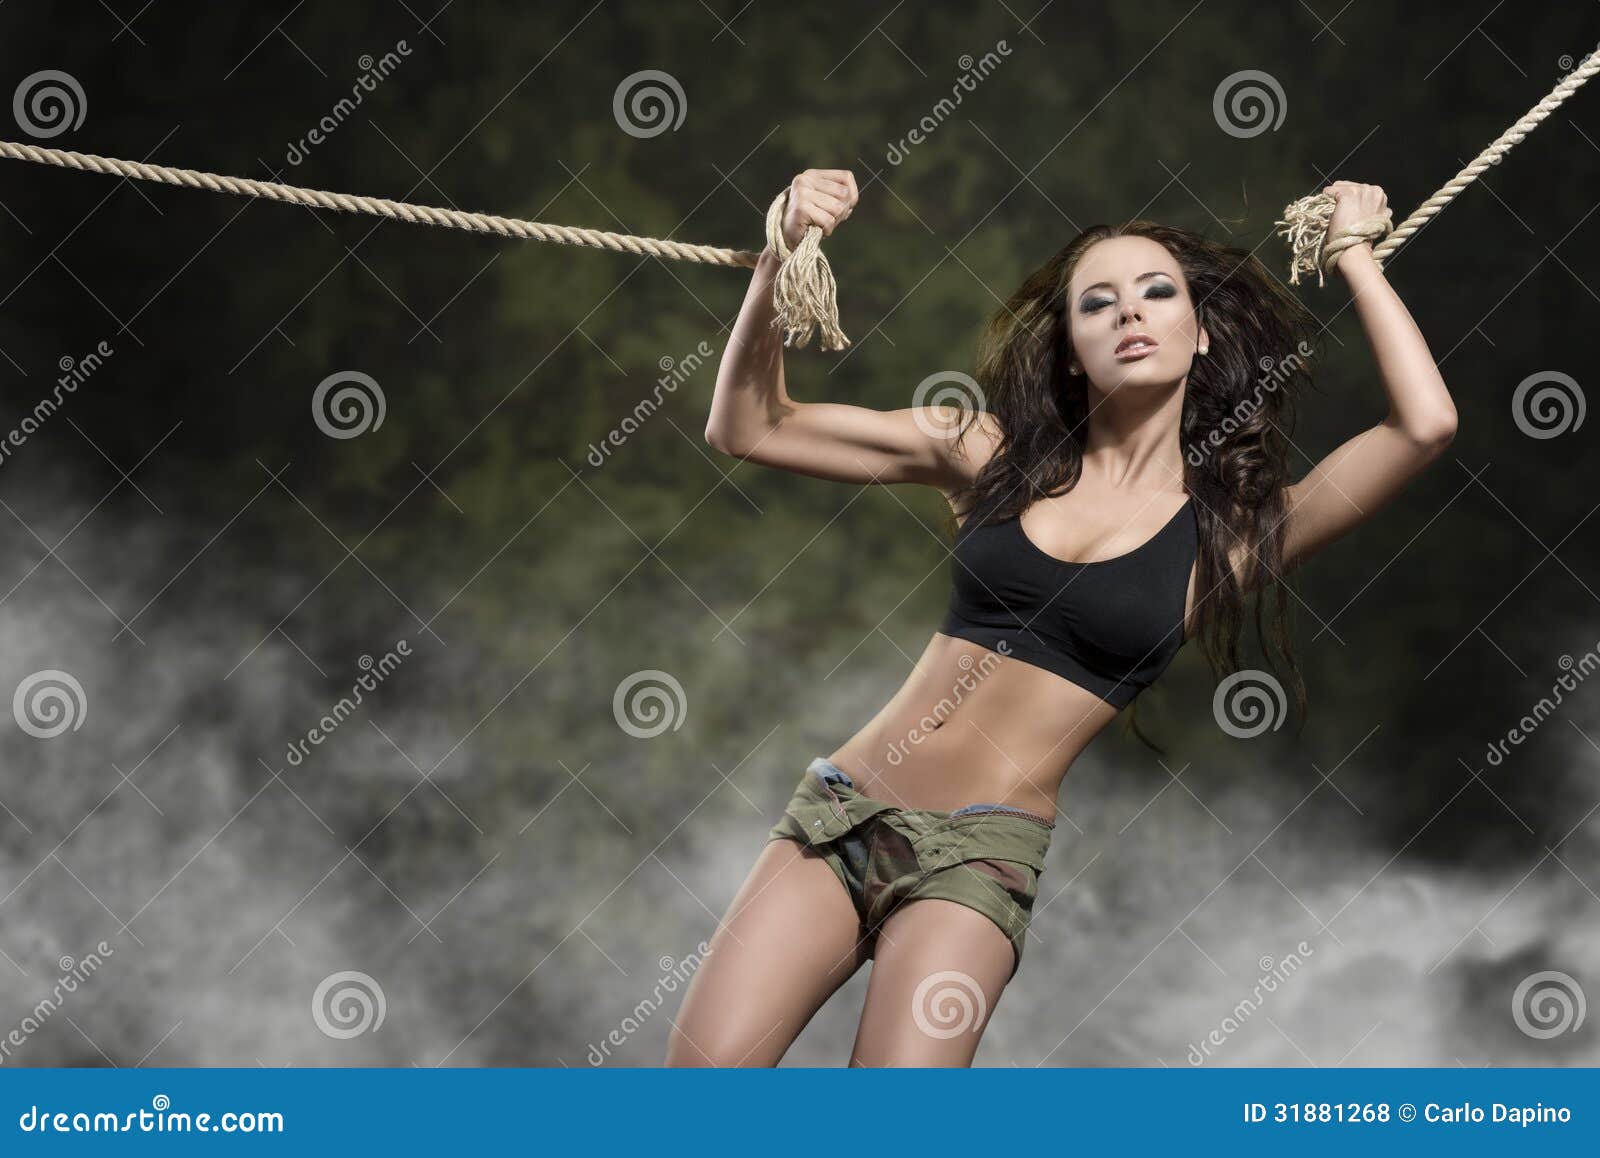 girls tied with ropes